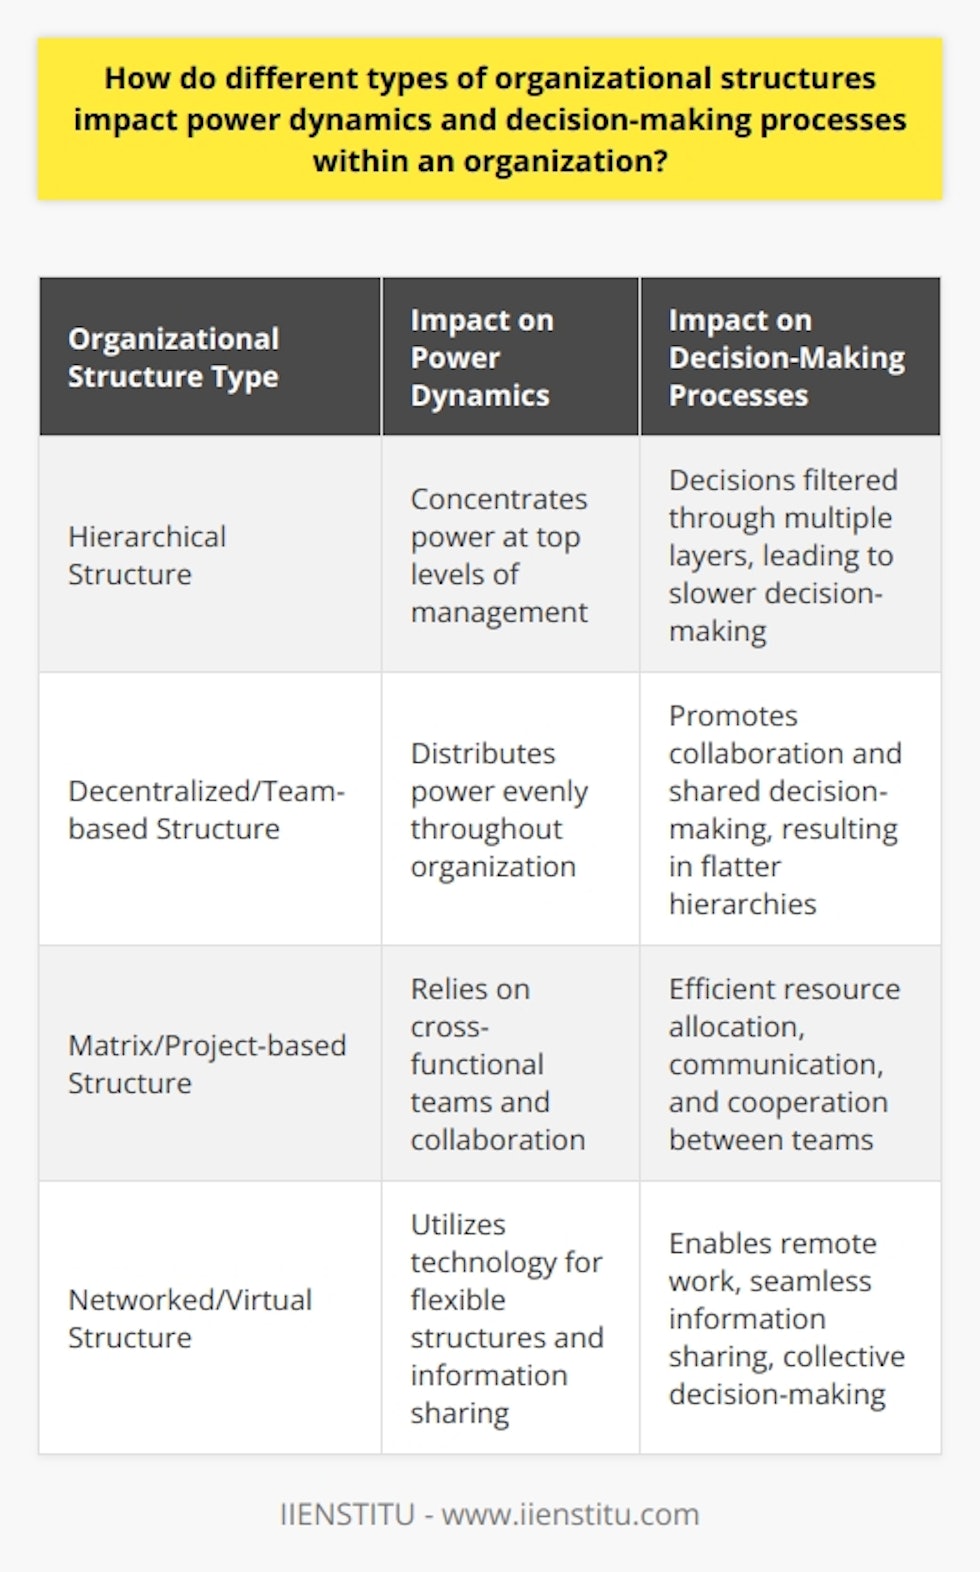 Organizational structures have a profound impact on power dynamics and decision-making processes within an organization. The type of structure employed can determine how power is allocated and decisions are made throughout the organization. By understanding these different types of structures, leaders can create an environment that is conducive to effective decision-making and empowered employees.One common organizational structure is the hierarchical structure, where power and decision-making authority are concentrated at the top levels of management. This structure provides clear lines of authority and accountability, but it can also create a culture of dependence on leadership. Decision-making can be slowed down as decisions need to be filtered through multiple layers of management.On the other hand, decentralized and team-based structures distribute power and decision-making authority more evenly throughout the organization. These structures promote collaboration and shared decision-making, resulting in flatter hierarchies and greater employee involvement. This can lead to increased innovation, adaptability, and employee satisfaction, as employees feel empowered to contribute to the decision-making process.Matrix and project-based organizations operate under a somewhat hierarchical structure but rely heavily on cross-functional teams and collaboration to make decisions and execute tasks. This approach improves efficiency by leveraging expertise from different departments and encourages communication and cooperation between teams. This structure is particularly effective in complex projects that require input from various stakeholders.Networked and virtual organizations utilize technology to create flexible structures that enhance information sharing and collaborative decision-making. These organizations transcend physical office boundaries and enable employees to work remotely and share information seamlessly. By harnessing collective intelligence, networked and virtual organizations can optimize resource allocation and expedite decision-making processes.In conclusion, choosing the right organizational structure is crucial for creating an effective decision-making environment and empowered employees. Hierarchical structures centralize power and control, while decentralized, team-based, matrix, and networked structures promote collaboration, autonomy, and adaptability. By understanding the impact of different structures on power dynamics, leaders can make more informed decisions when organizing their organizations.